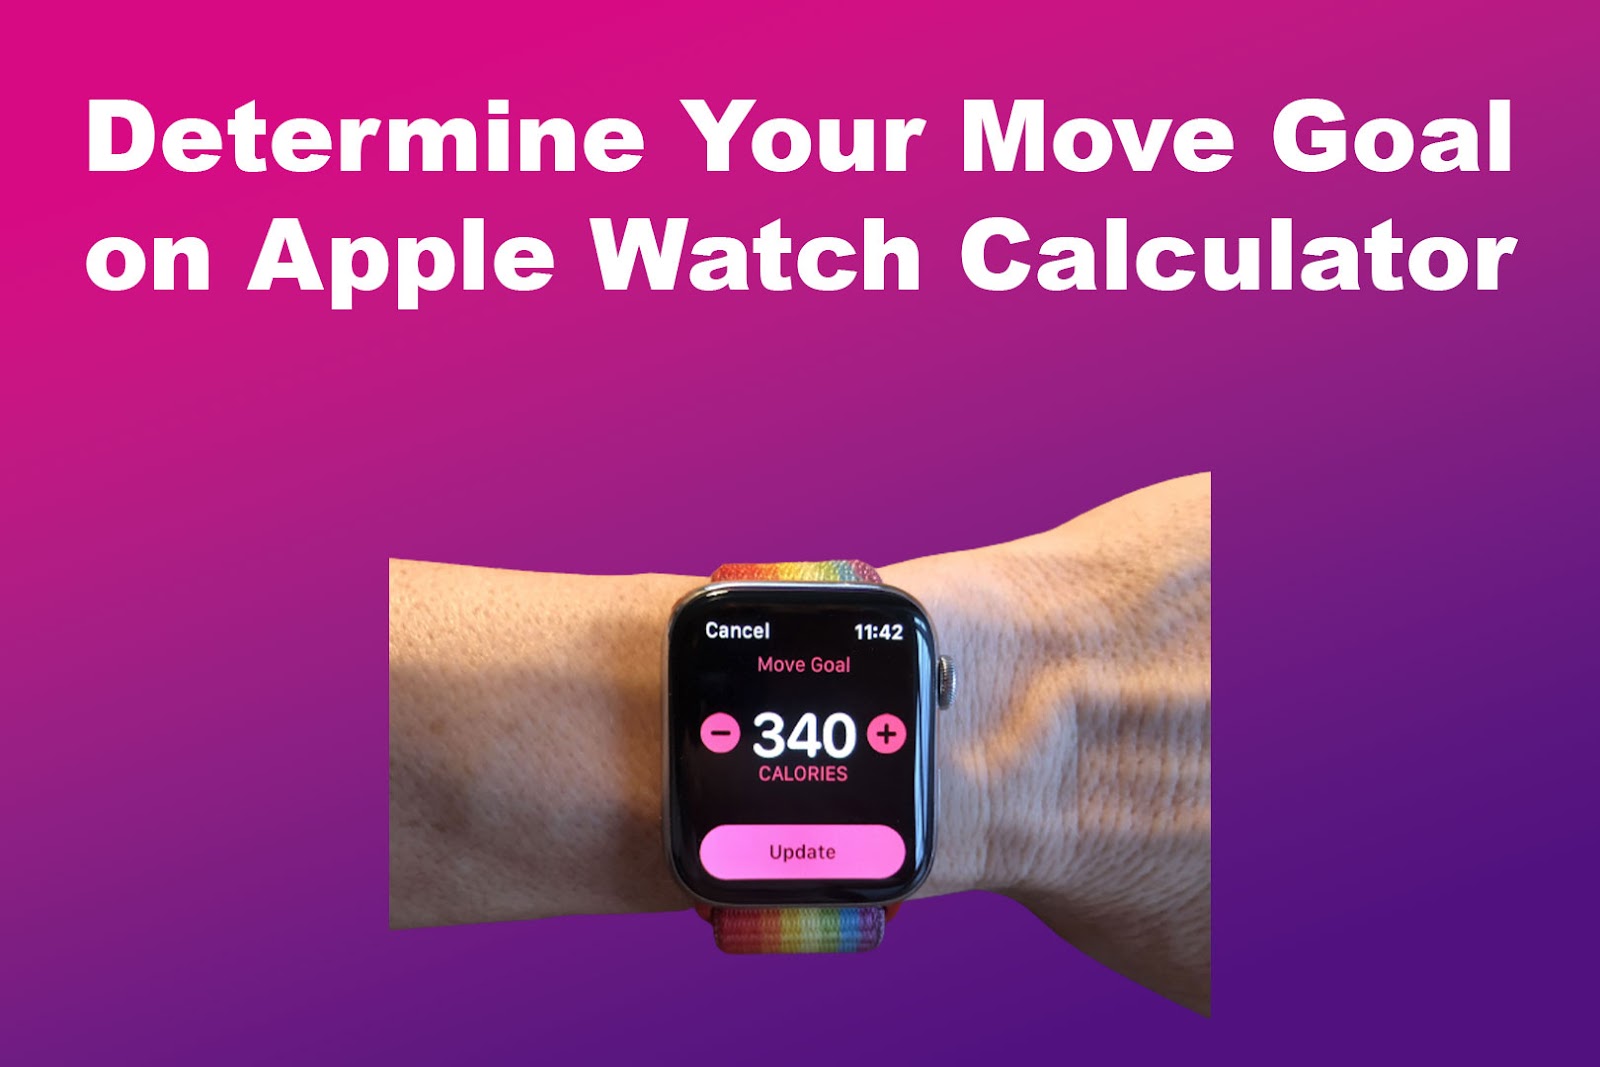 How to Determine Your Move Goal on Apple Watch Calculator